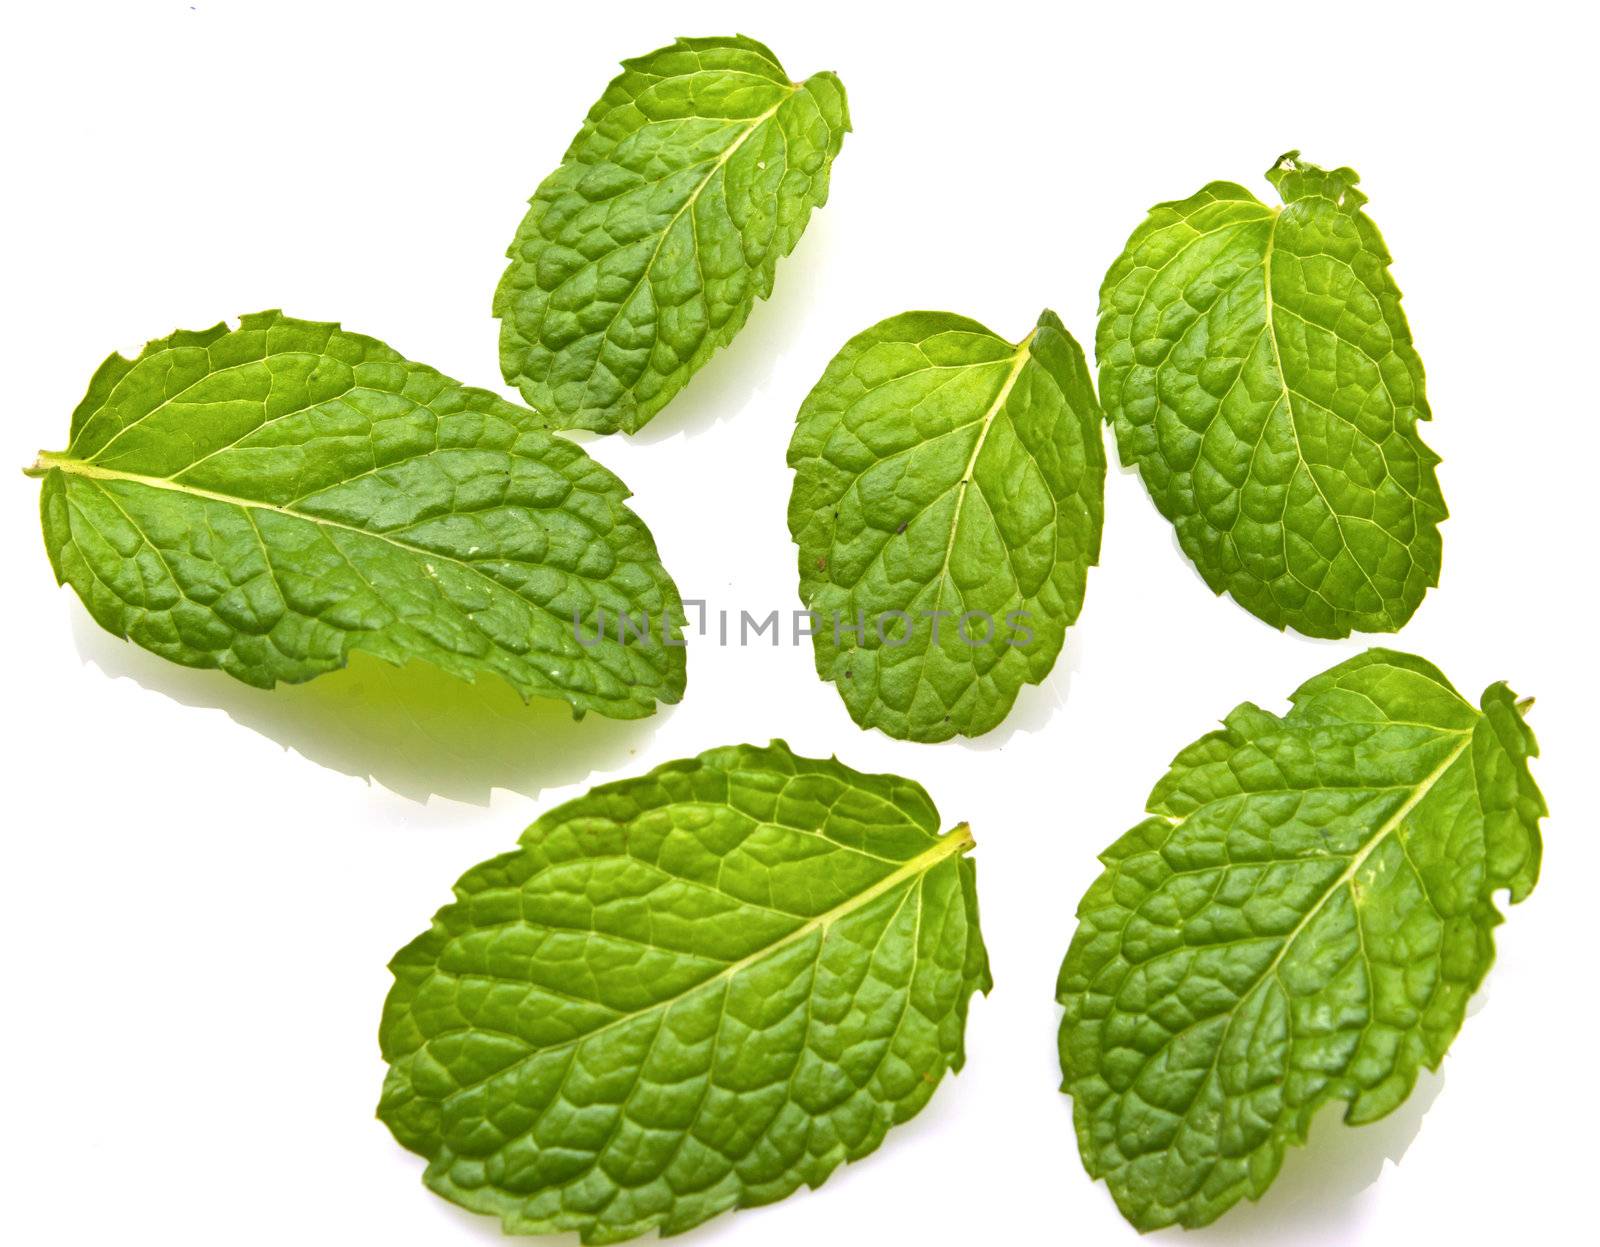 fresh mint leaves isolated on white background.